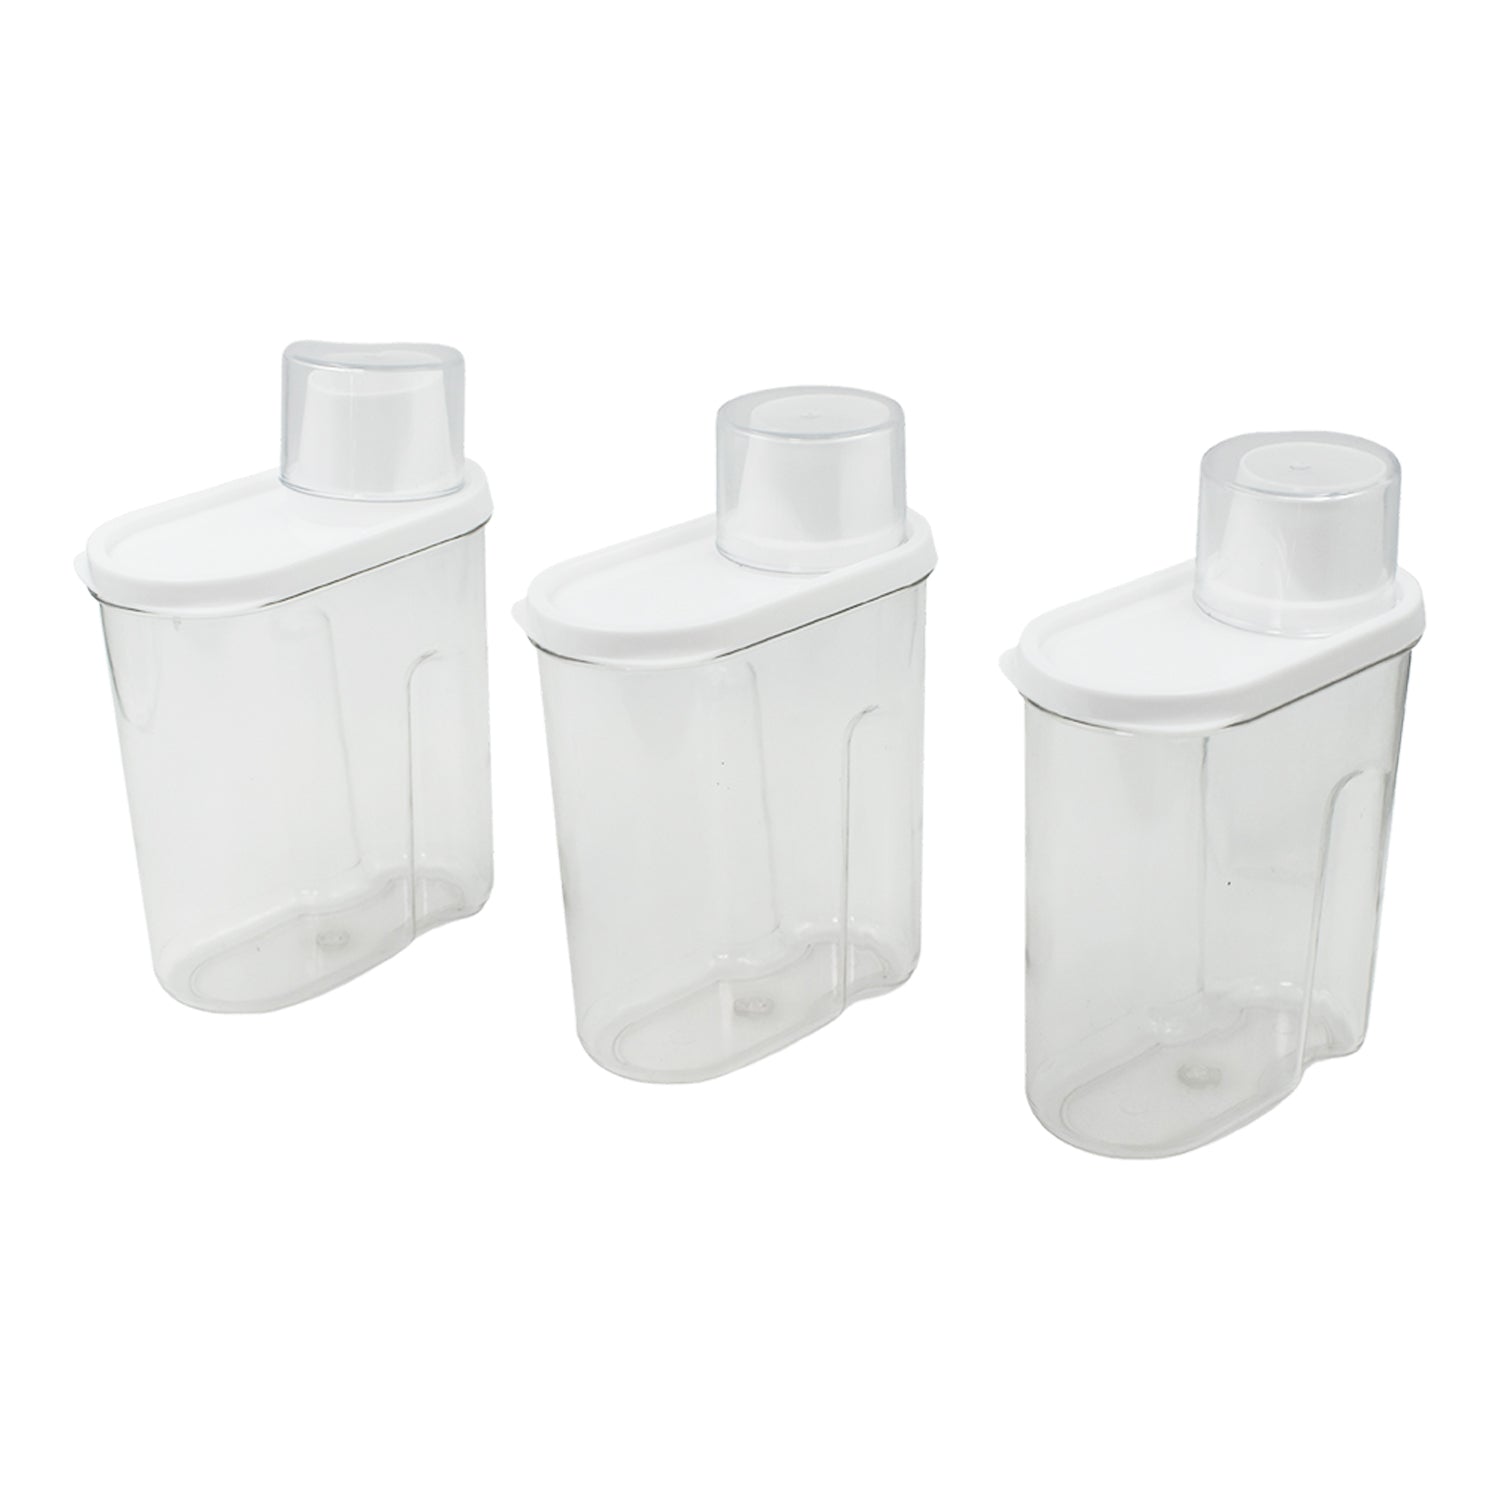 2760 3 Pc Cereal Dispenser 750 ML For Storing And Serving Of Cereal And All Stuffs. 